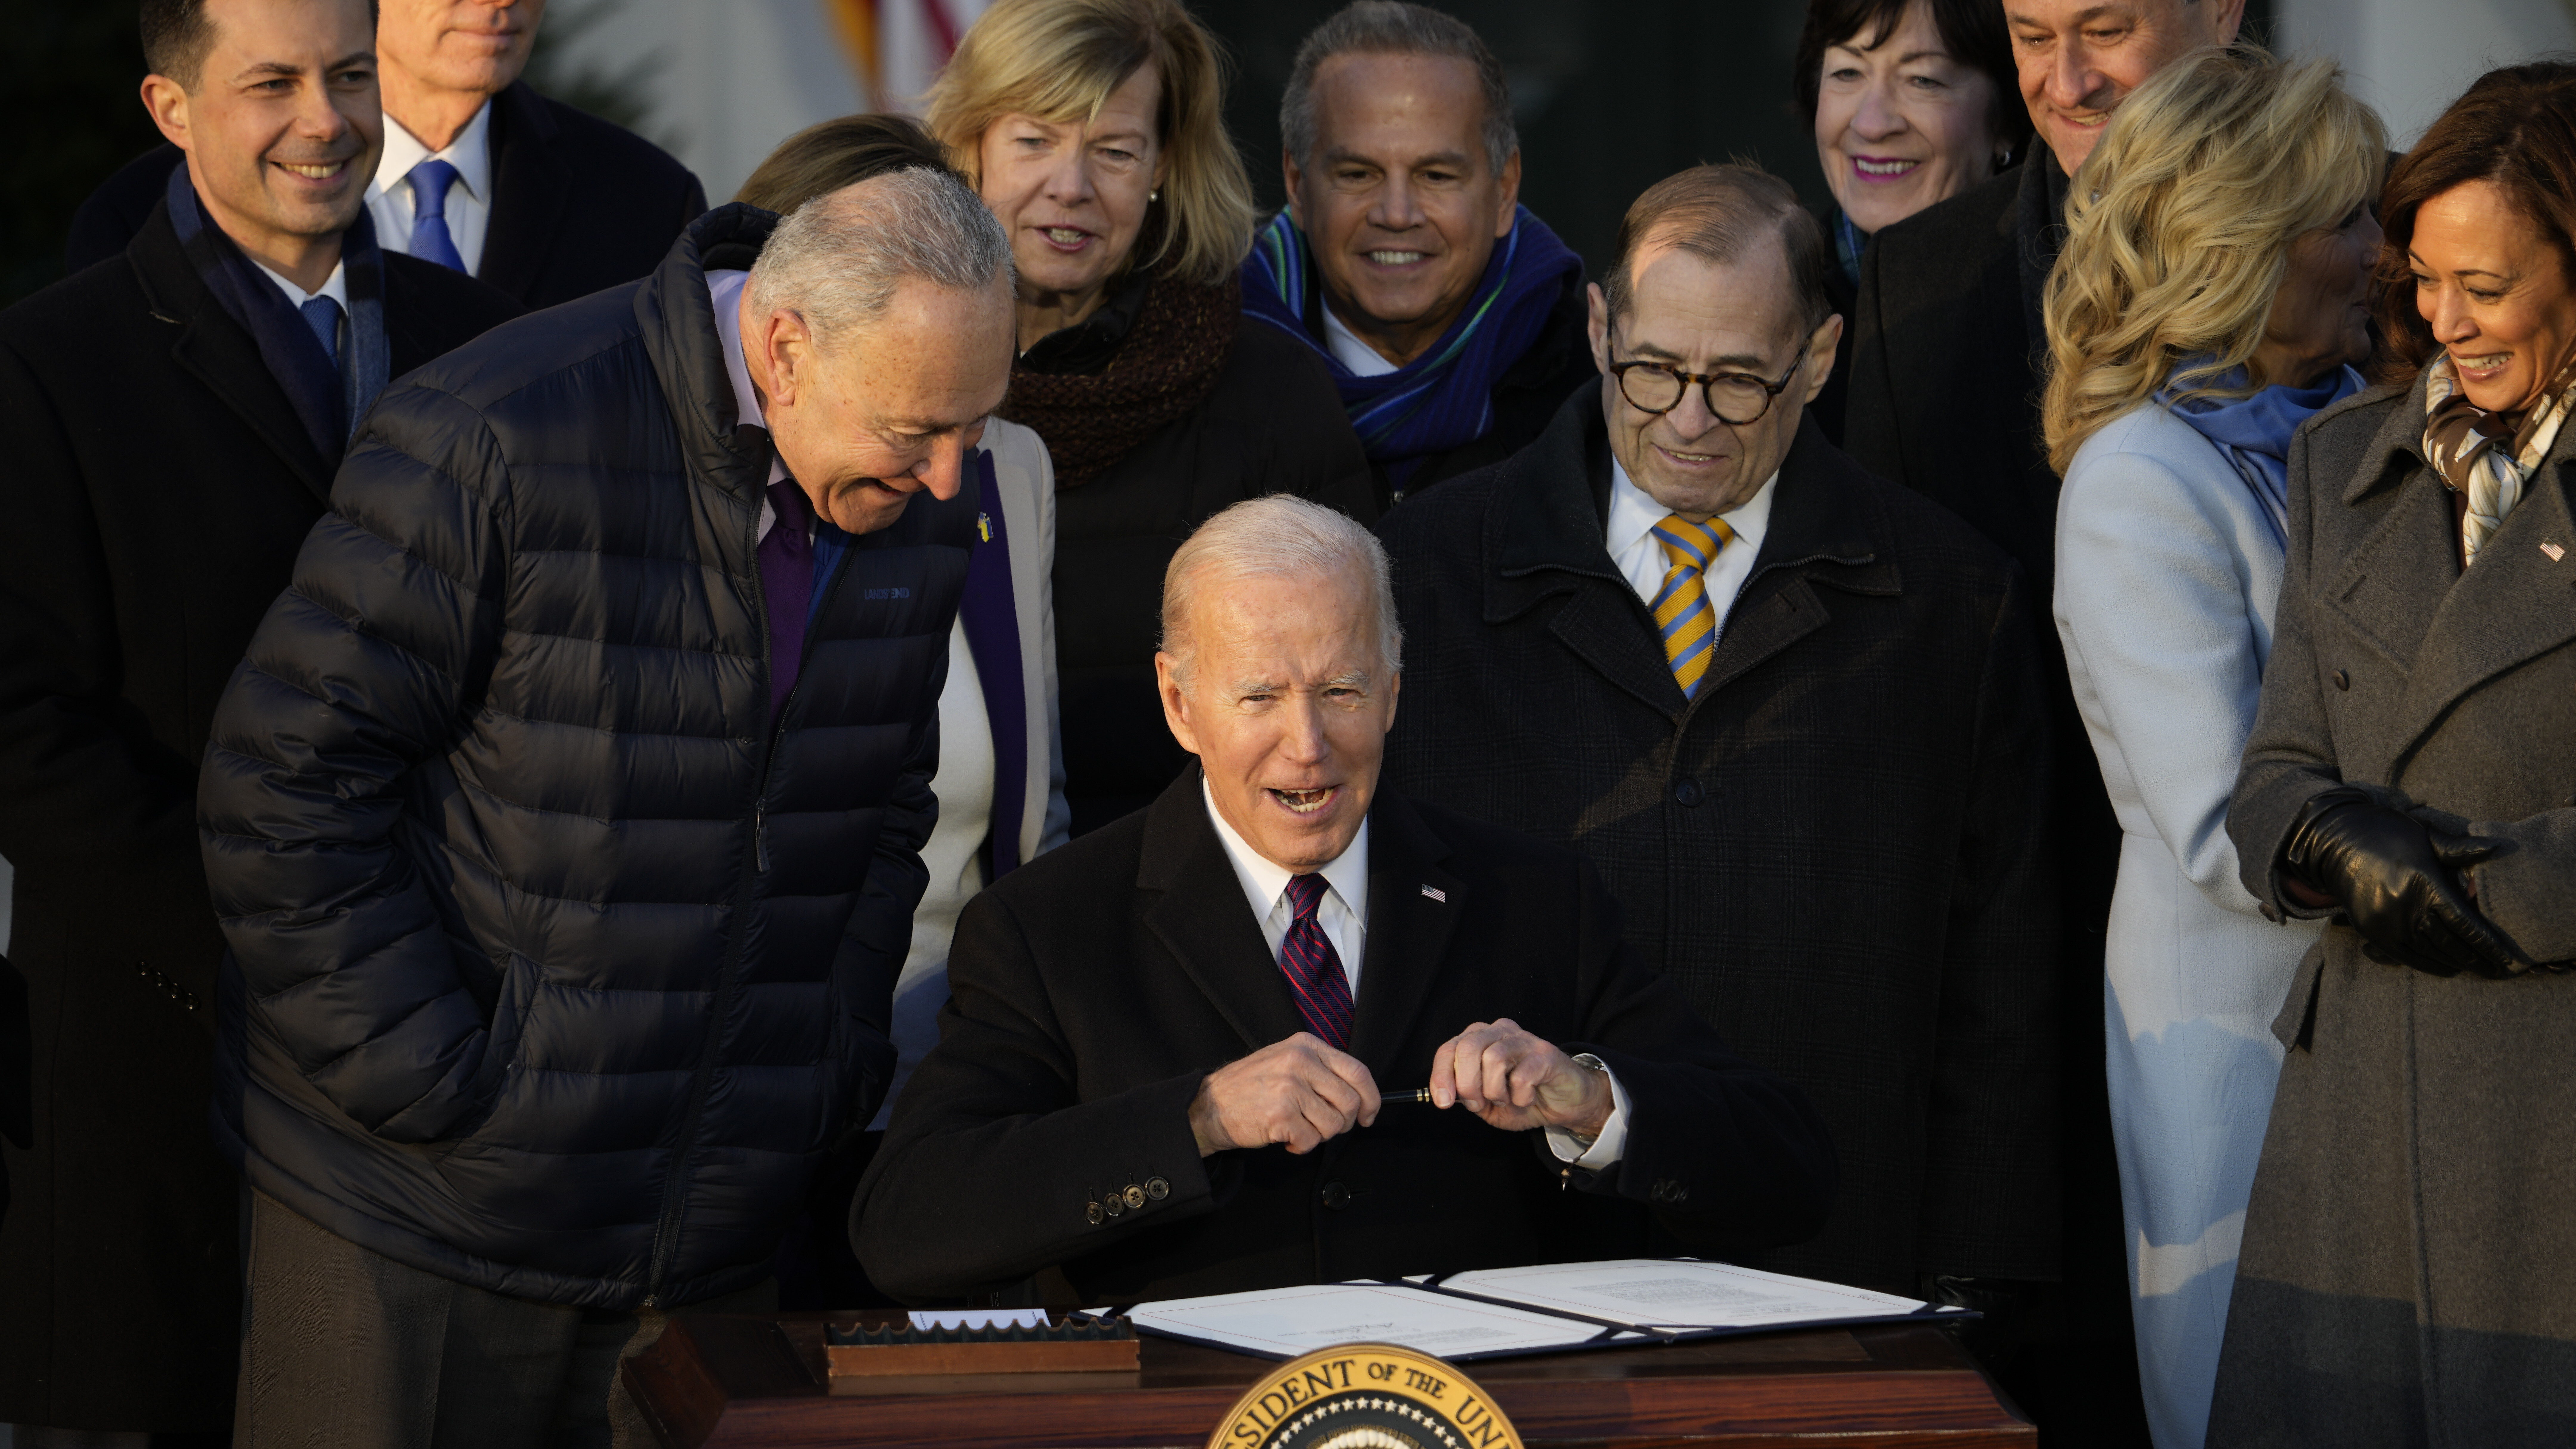 President Biden has signed the Respect For Marriage Act into Law. The new law is intended to safegu...